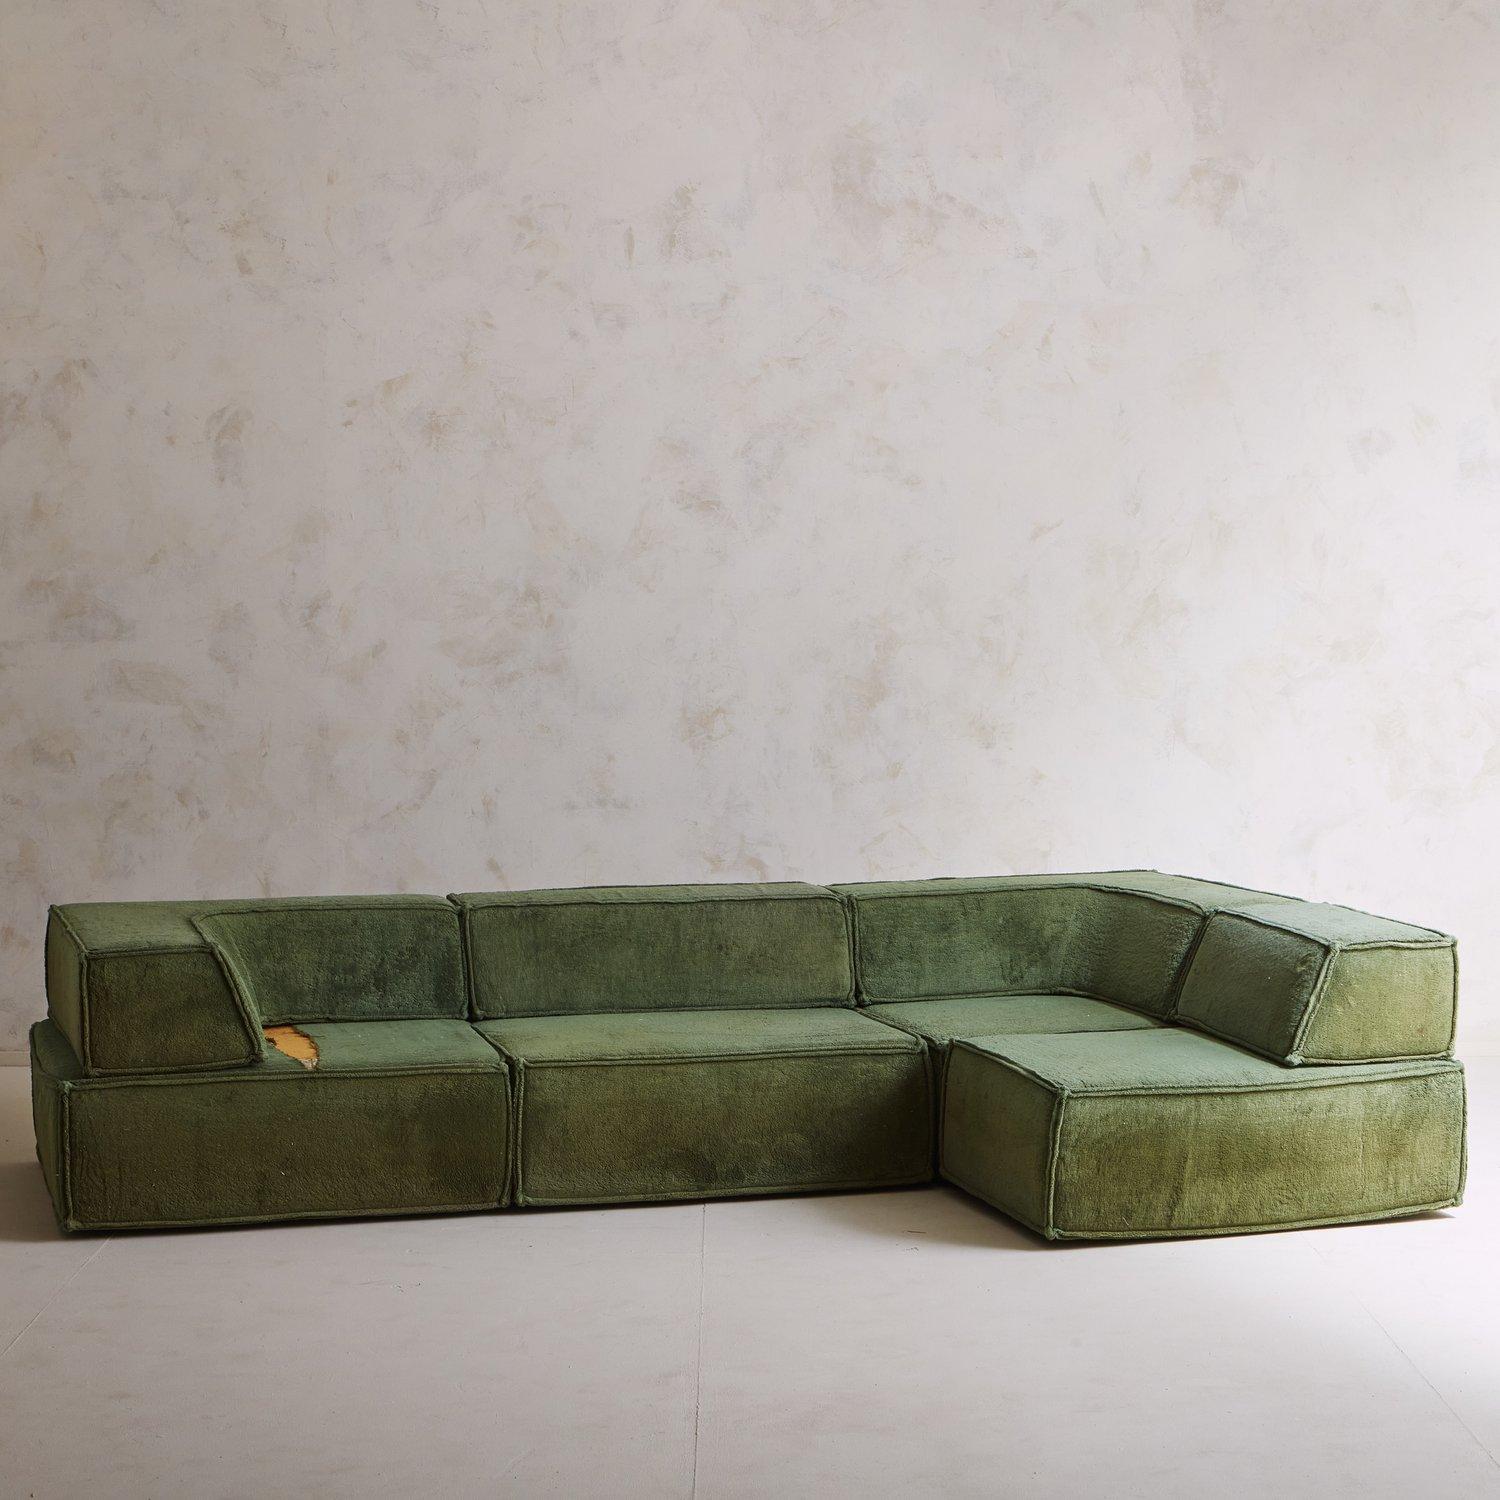 A Cor Trio modular sofa designed by Team Form AG in 1972. This elegant sofa sits directly on the ground and has four sections with removable backrests. It retains its original green upholstery and has beautiful double pinched welt. Sourced in